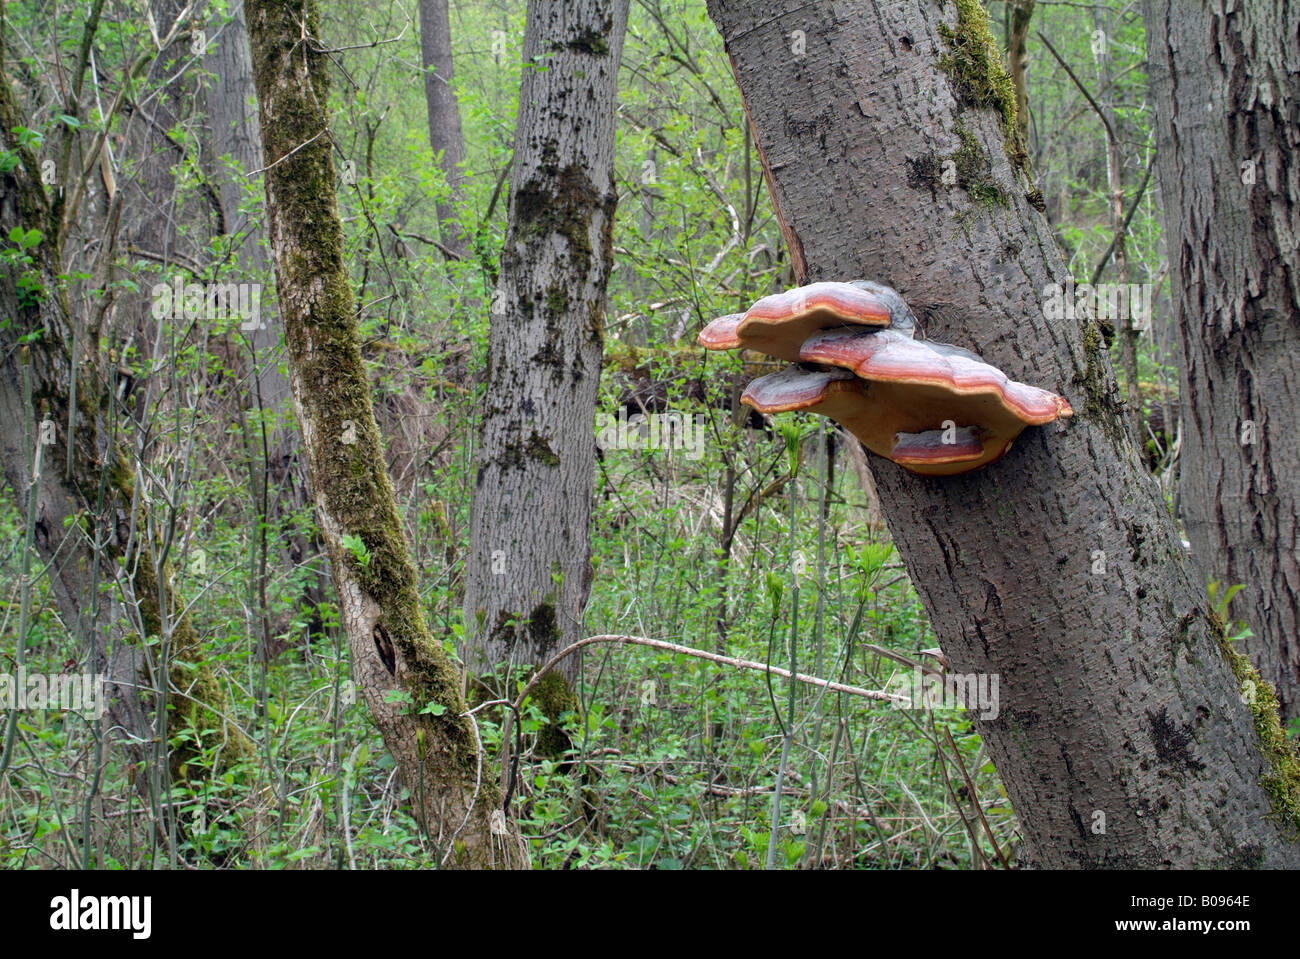 Bracket fungus growing on a tree in a riparian forest, Tratzberg, Stans, Tirol, Austria Stock Photo